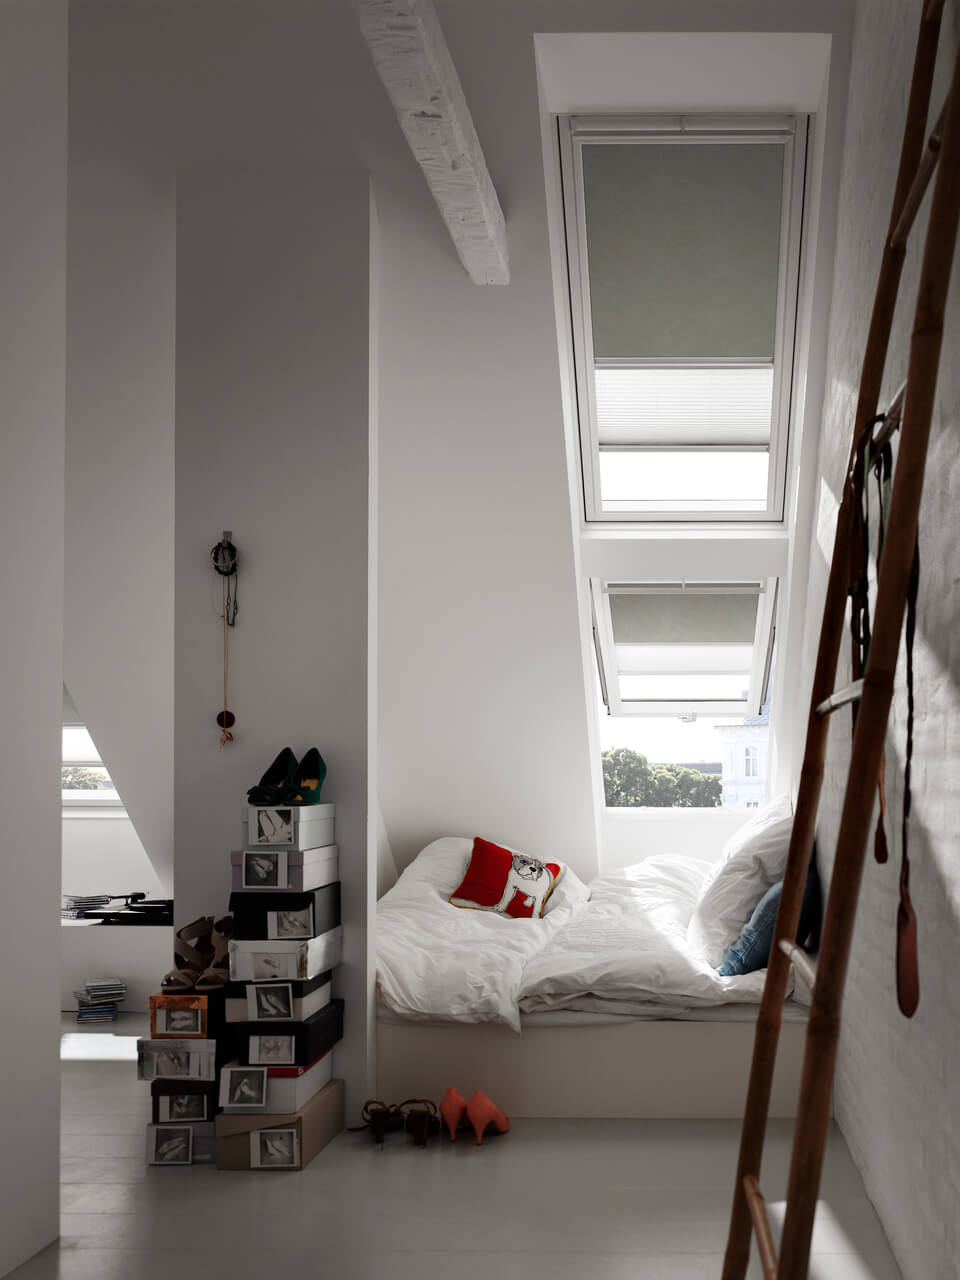 Bedroom with a ladder and greenish VELUX Duo blinds installed in the windows.